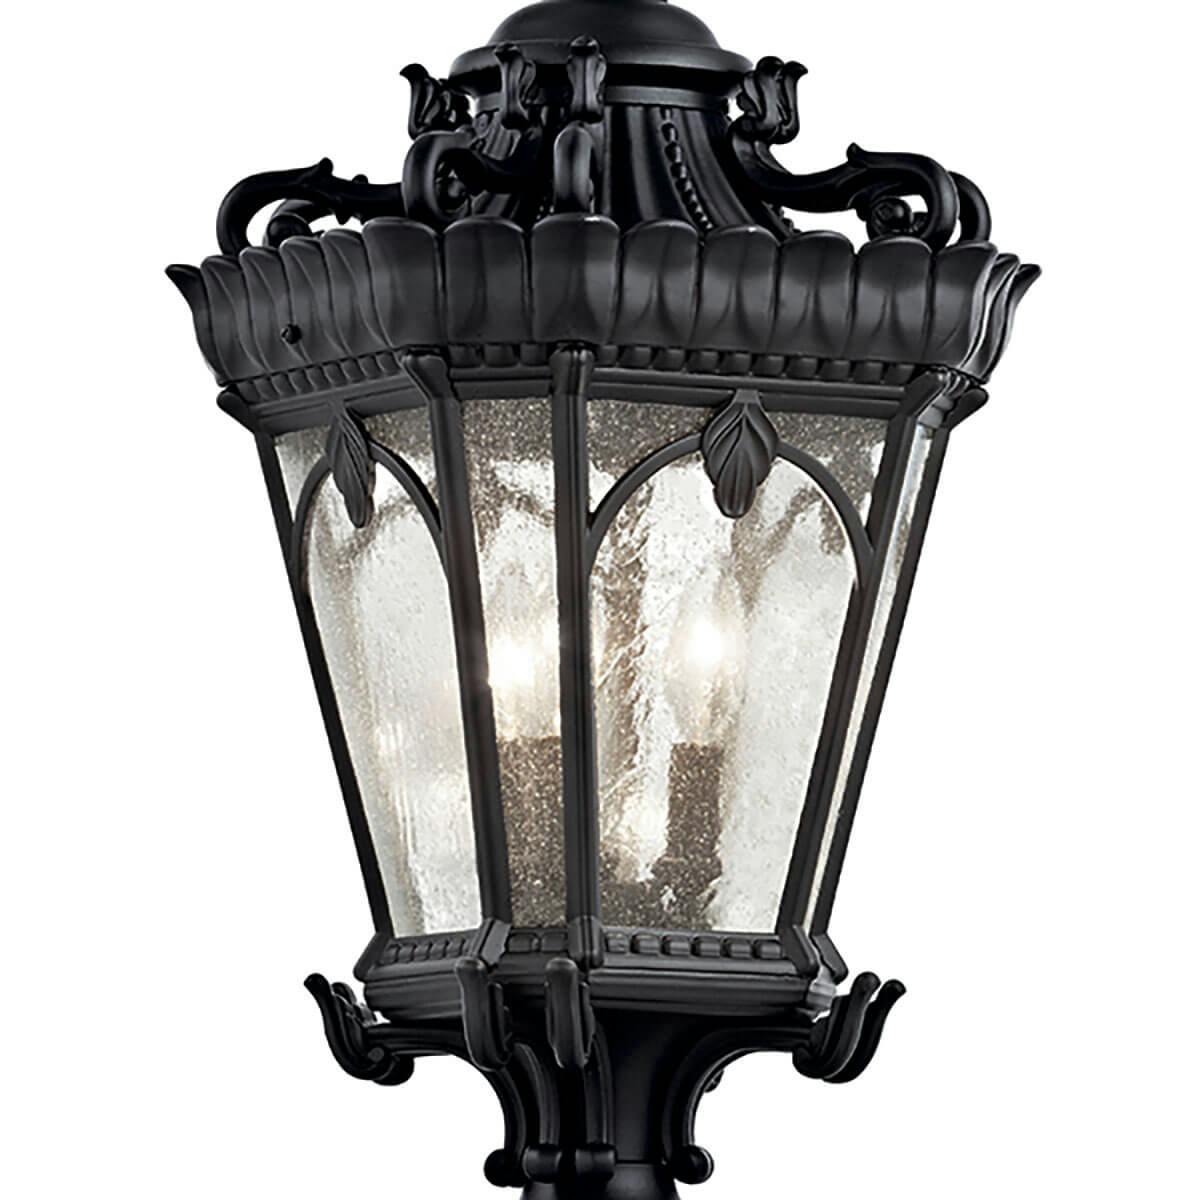 Close up view of the Tournai 27" 3 Light Post Light Black on a white background